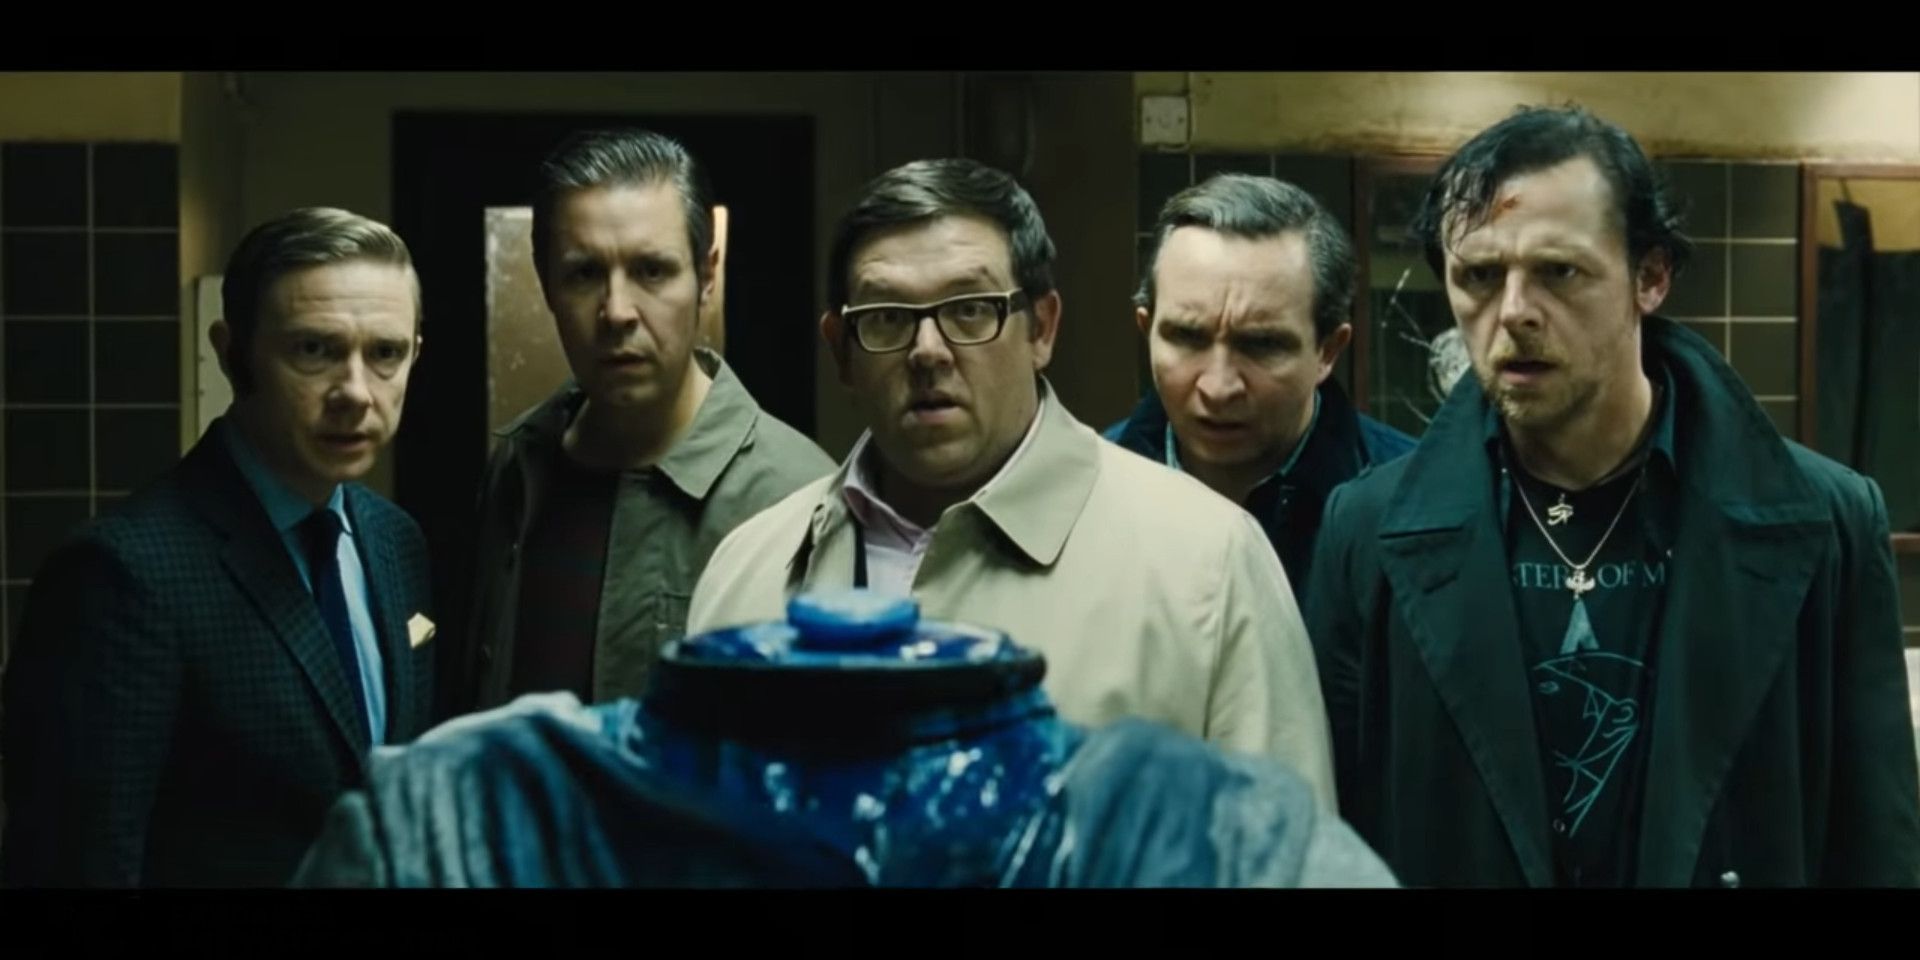 The five main cast members of The World's End with a headless robot.